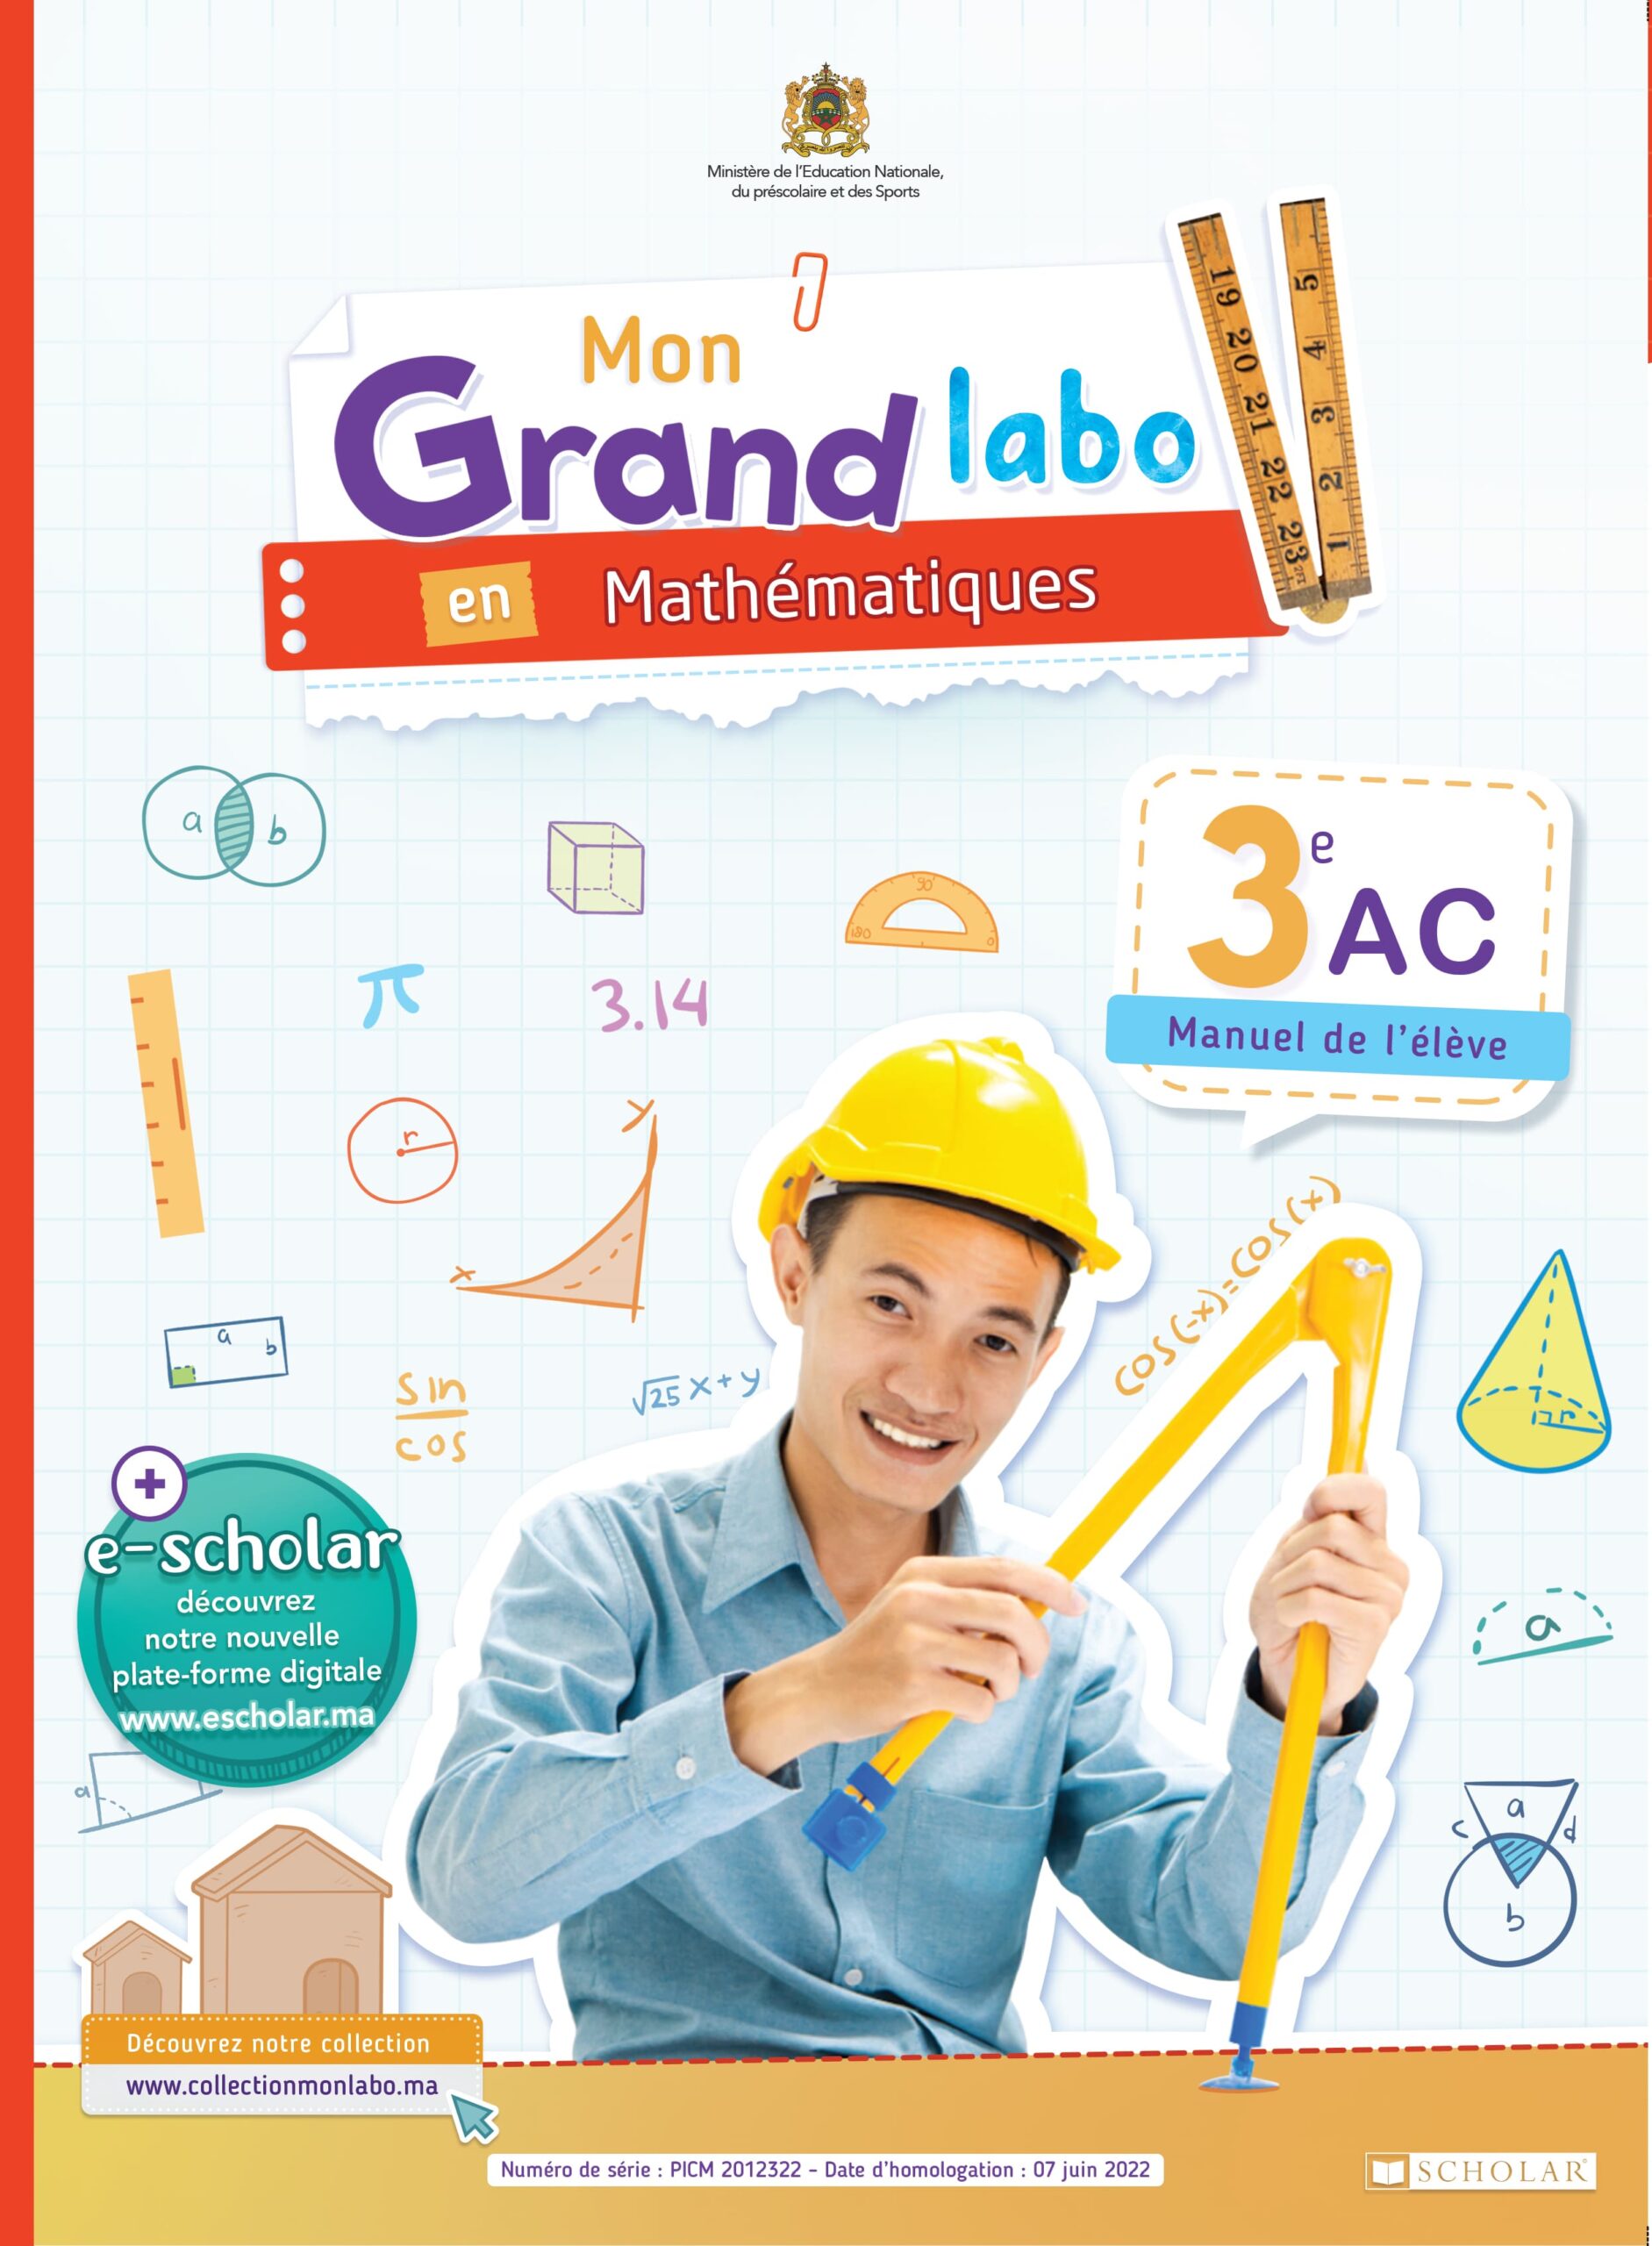 scholareditions-collectionmonlabo-mgl-math-3ac